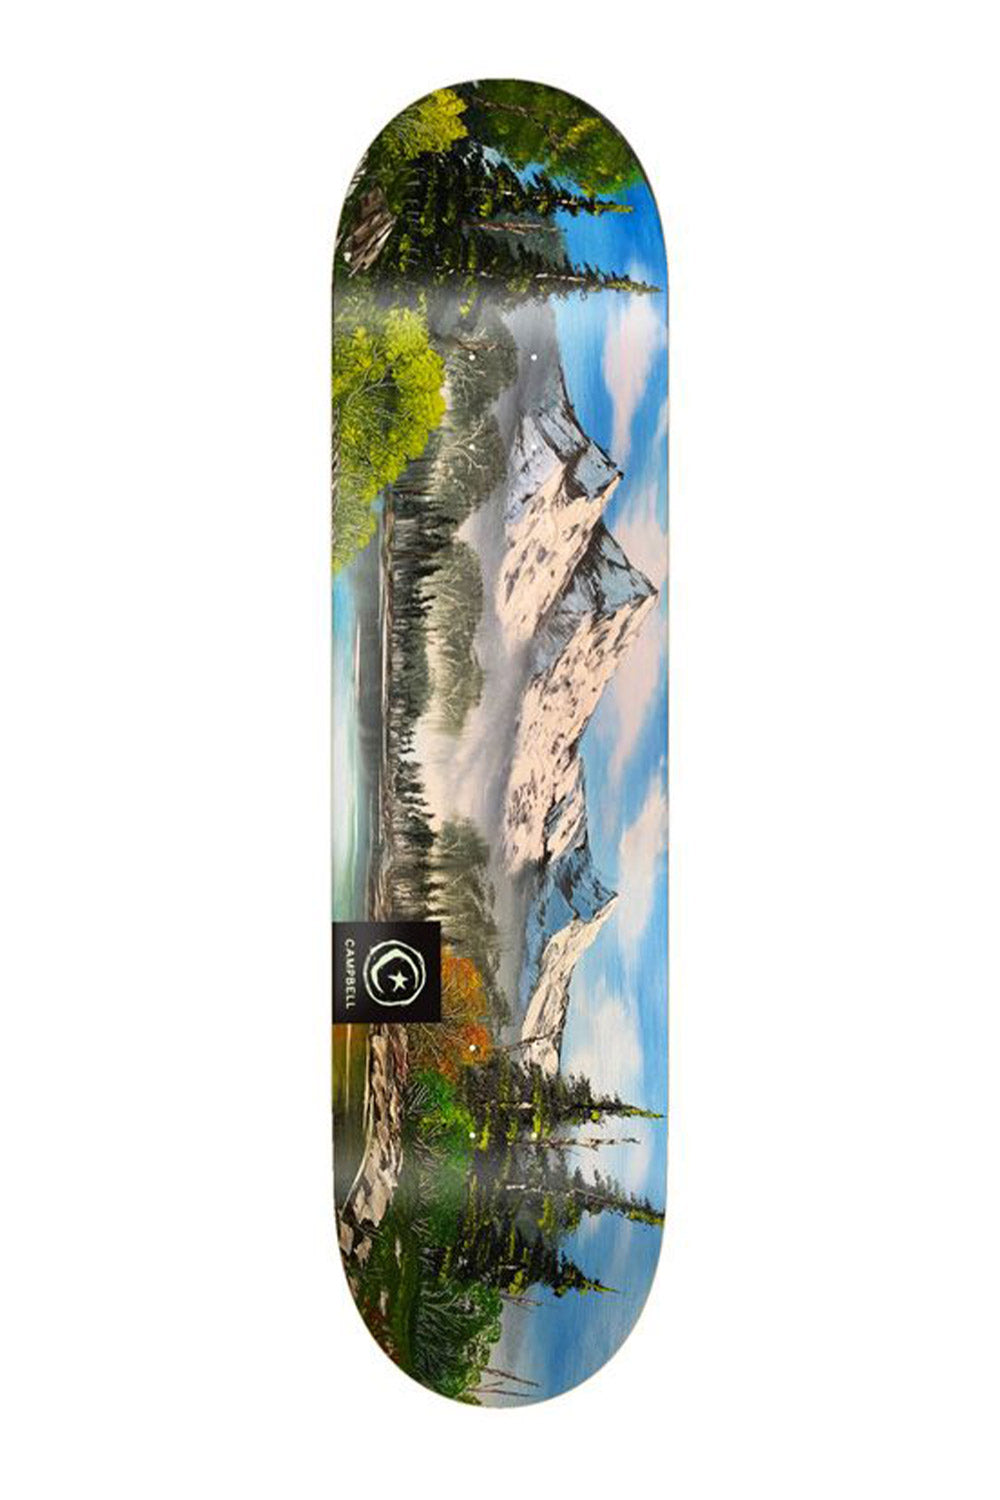 Foundation Aidan Campbell Scapes Skateboard Deck - 8.25"